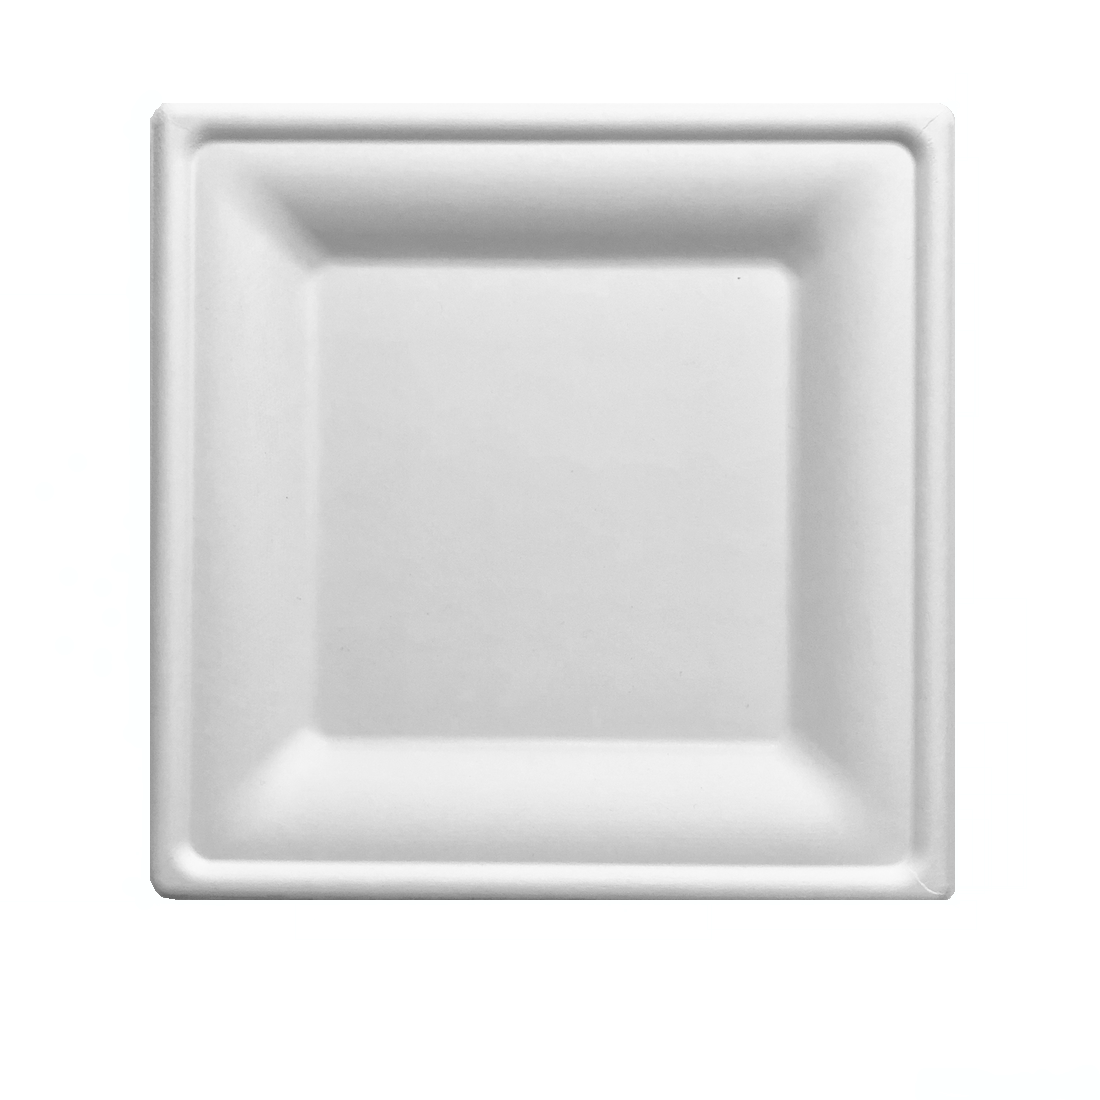 Square Biodegradable Disposable Plates [125 Pack]